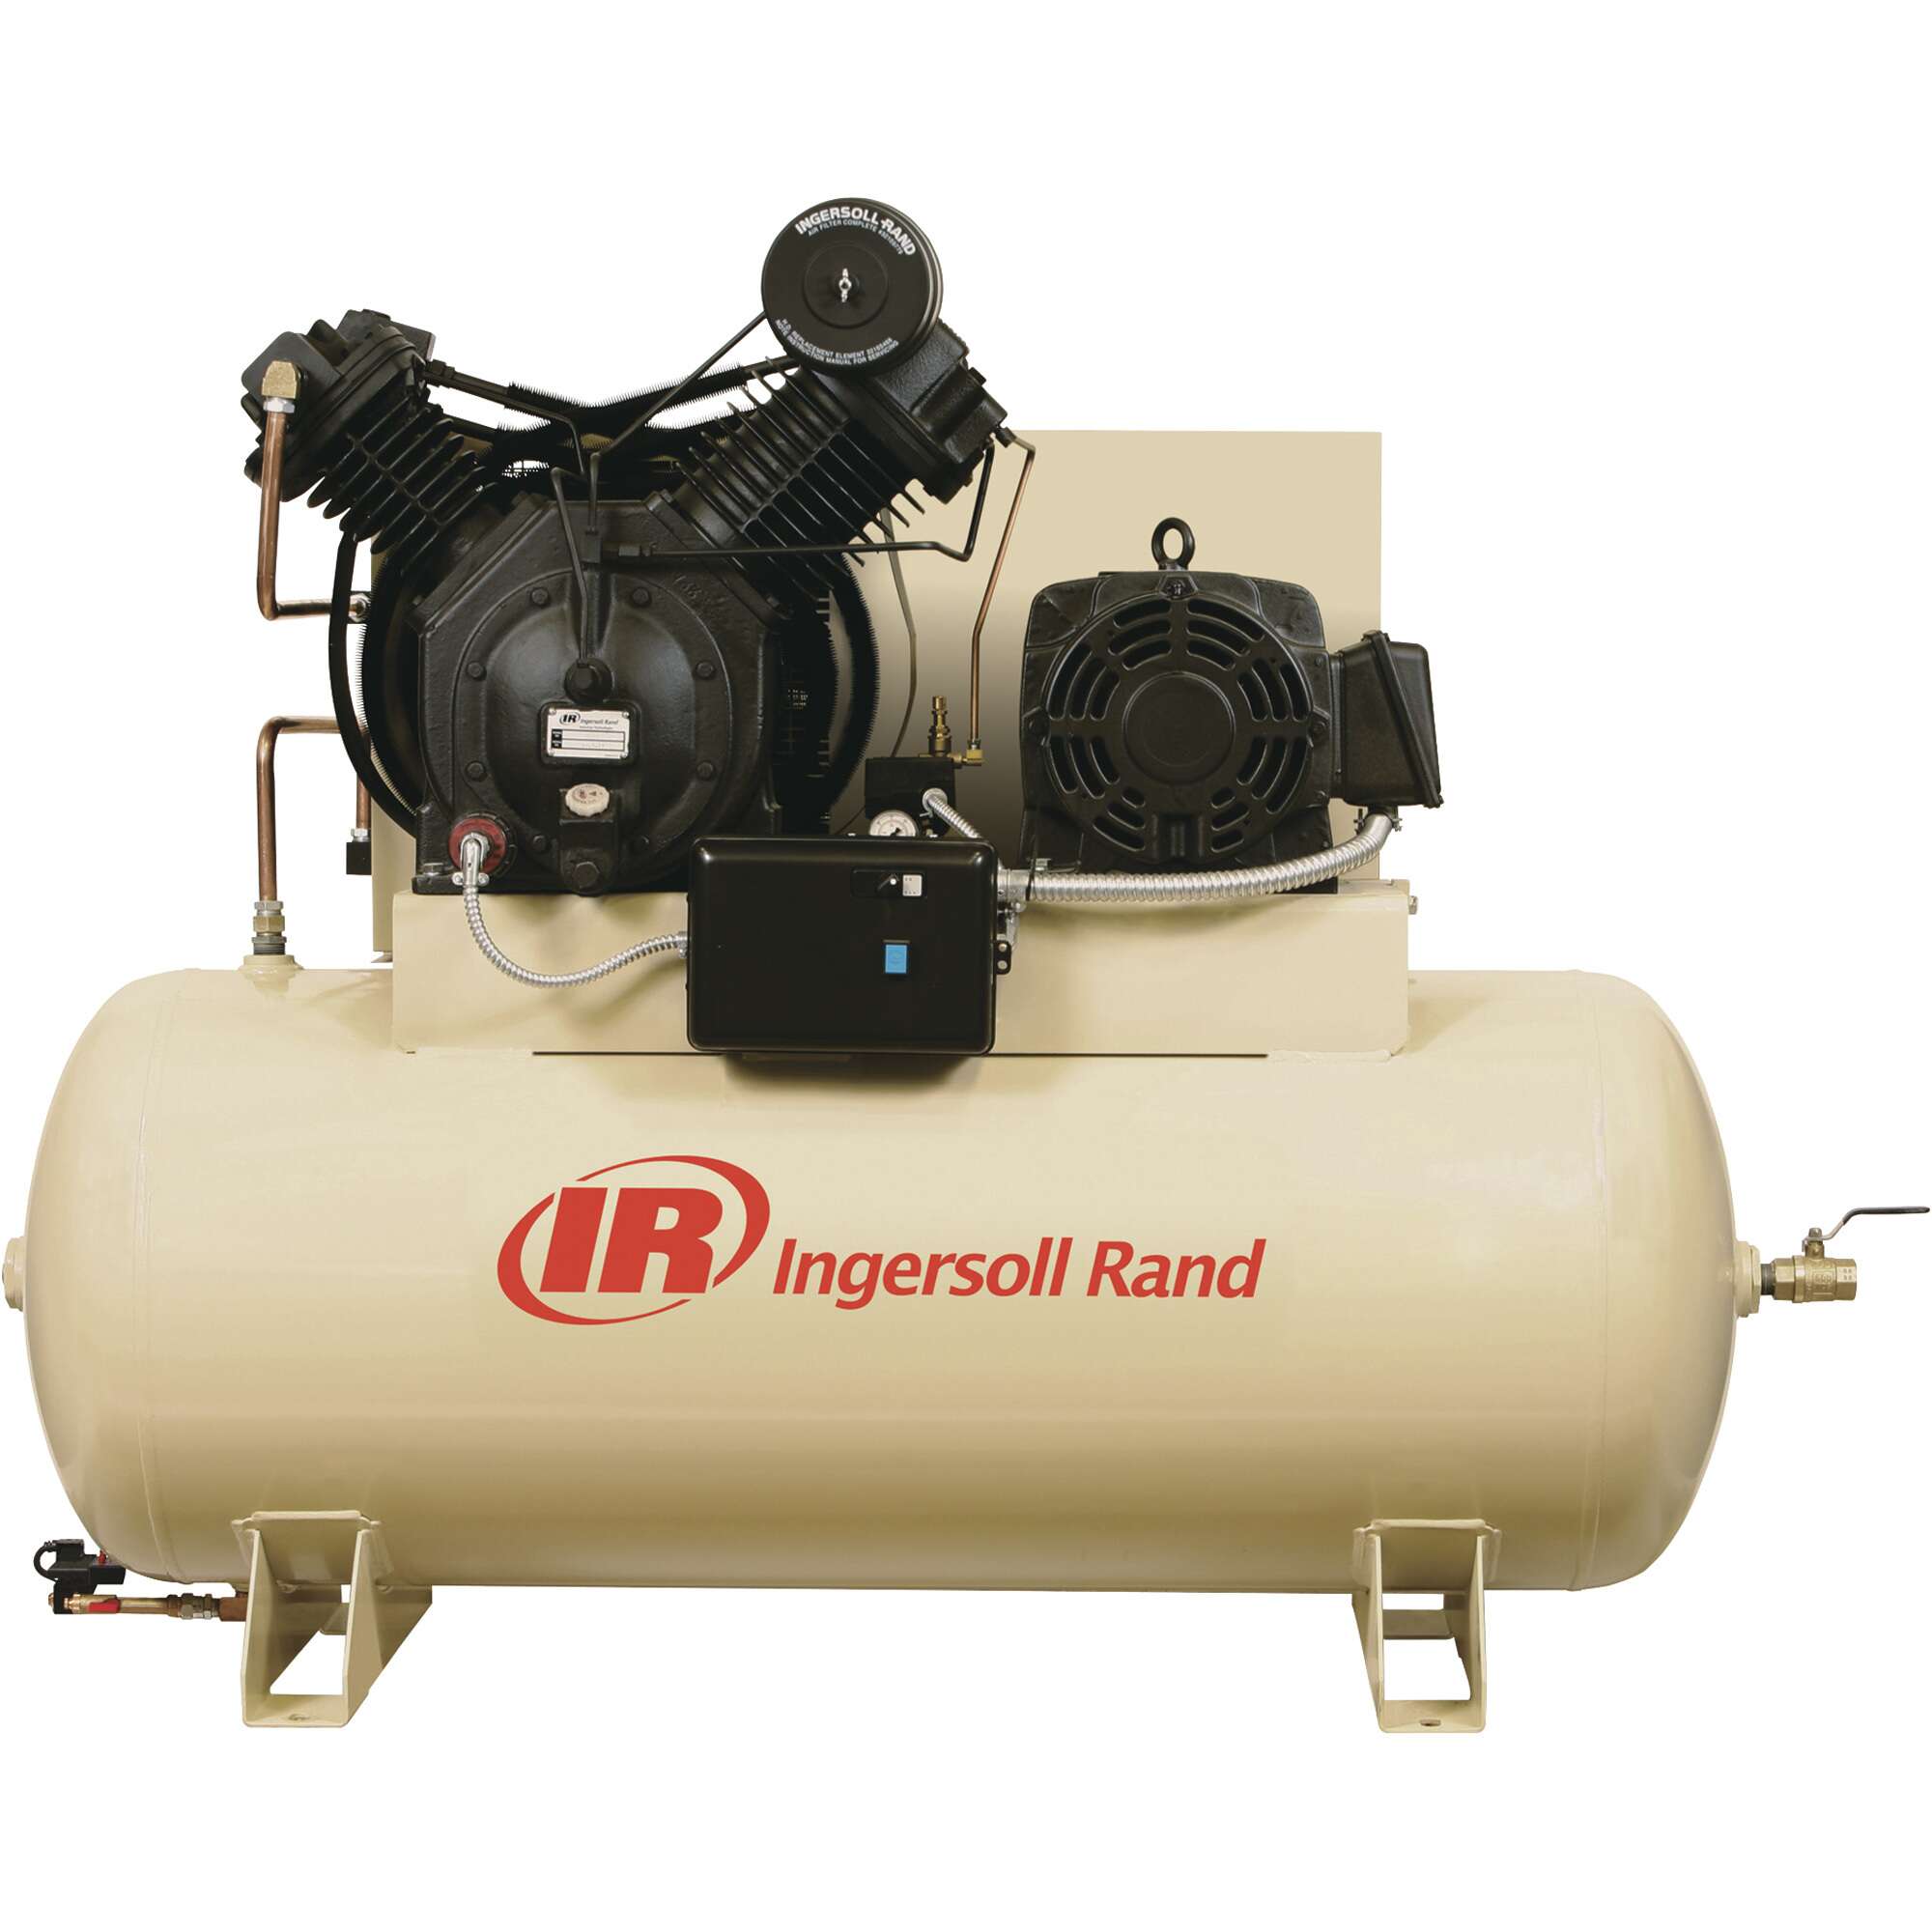 Ingersoll Rand Type30 Reciprocating Air Compressor Fully Packaged 10 HP 3 Phase 120 Gallon Horizontal